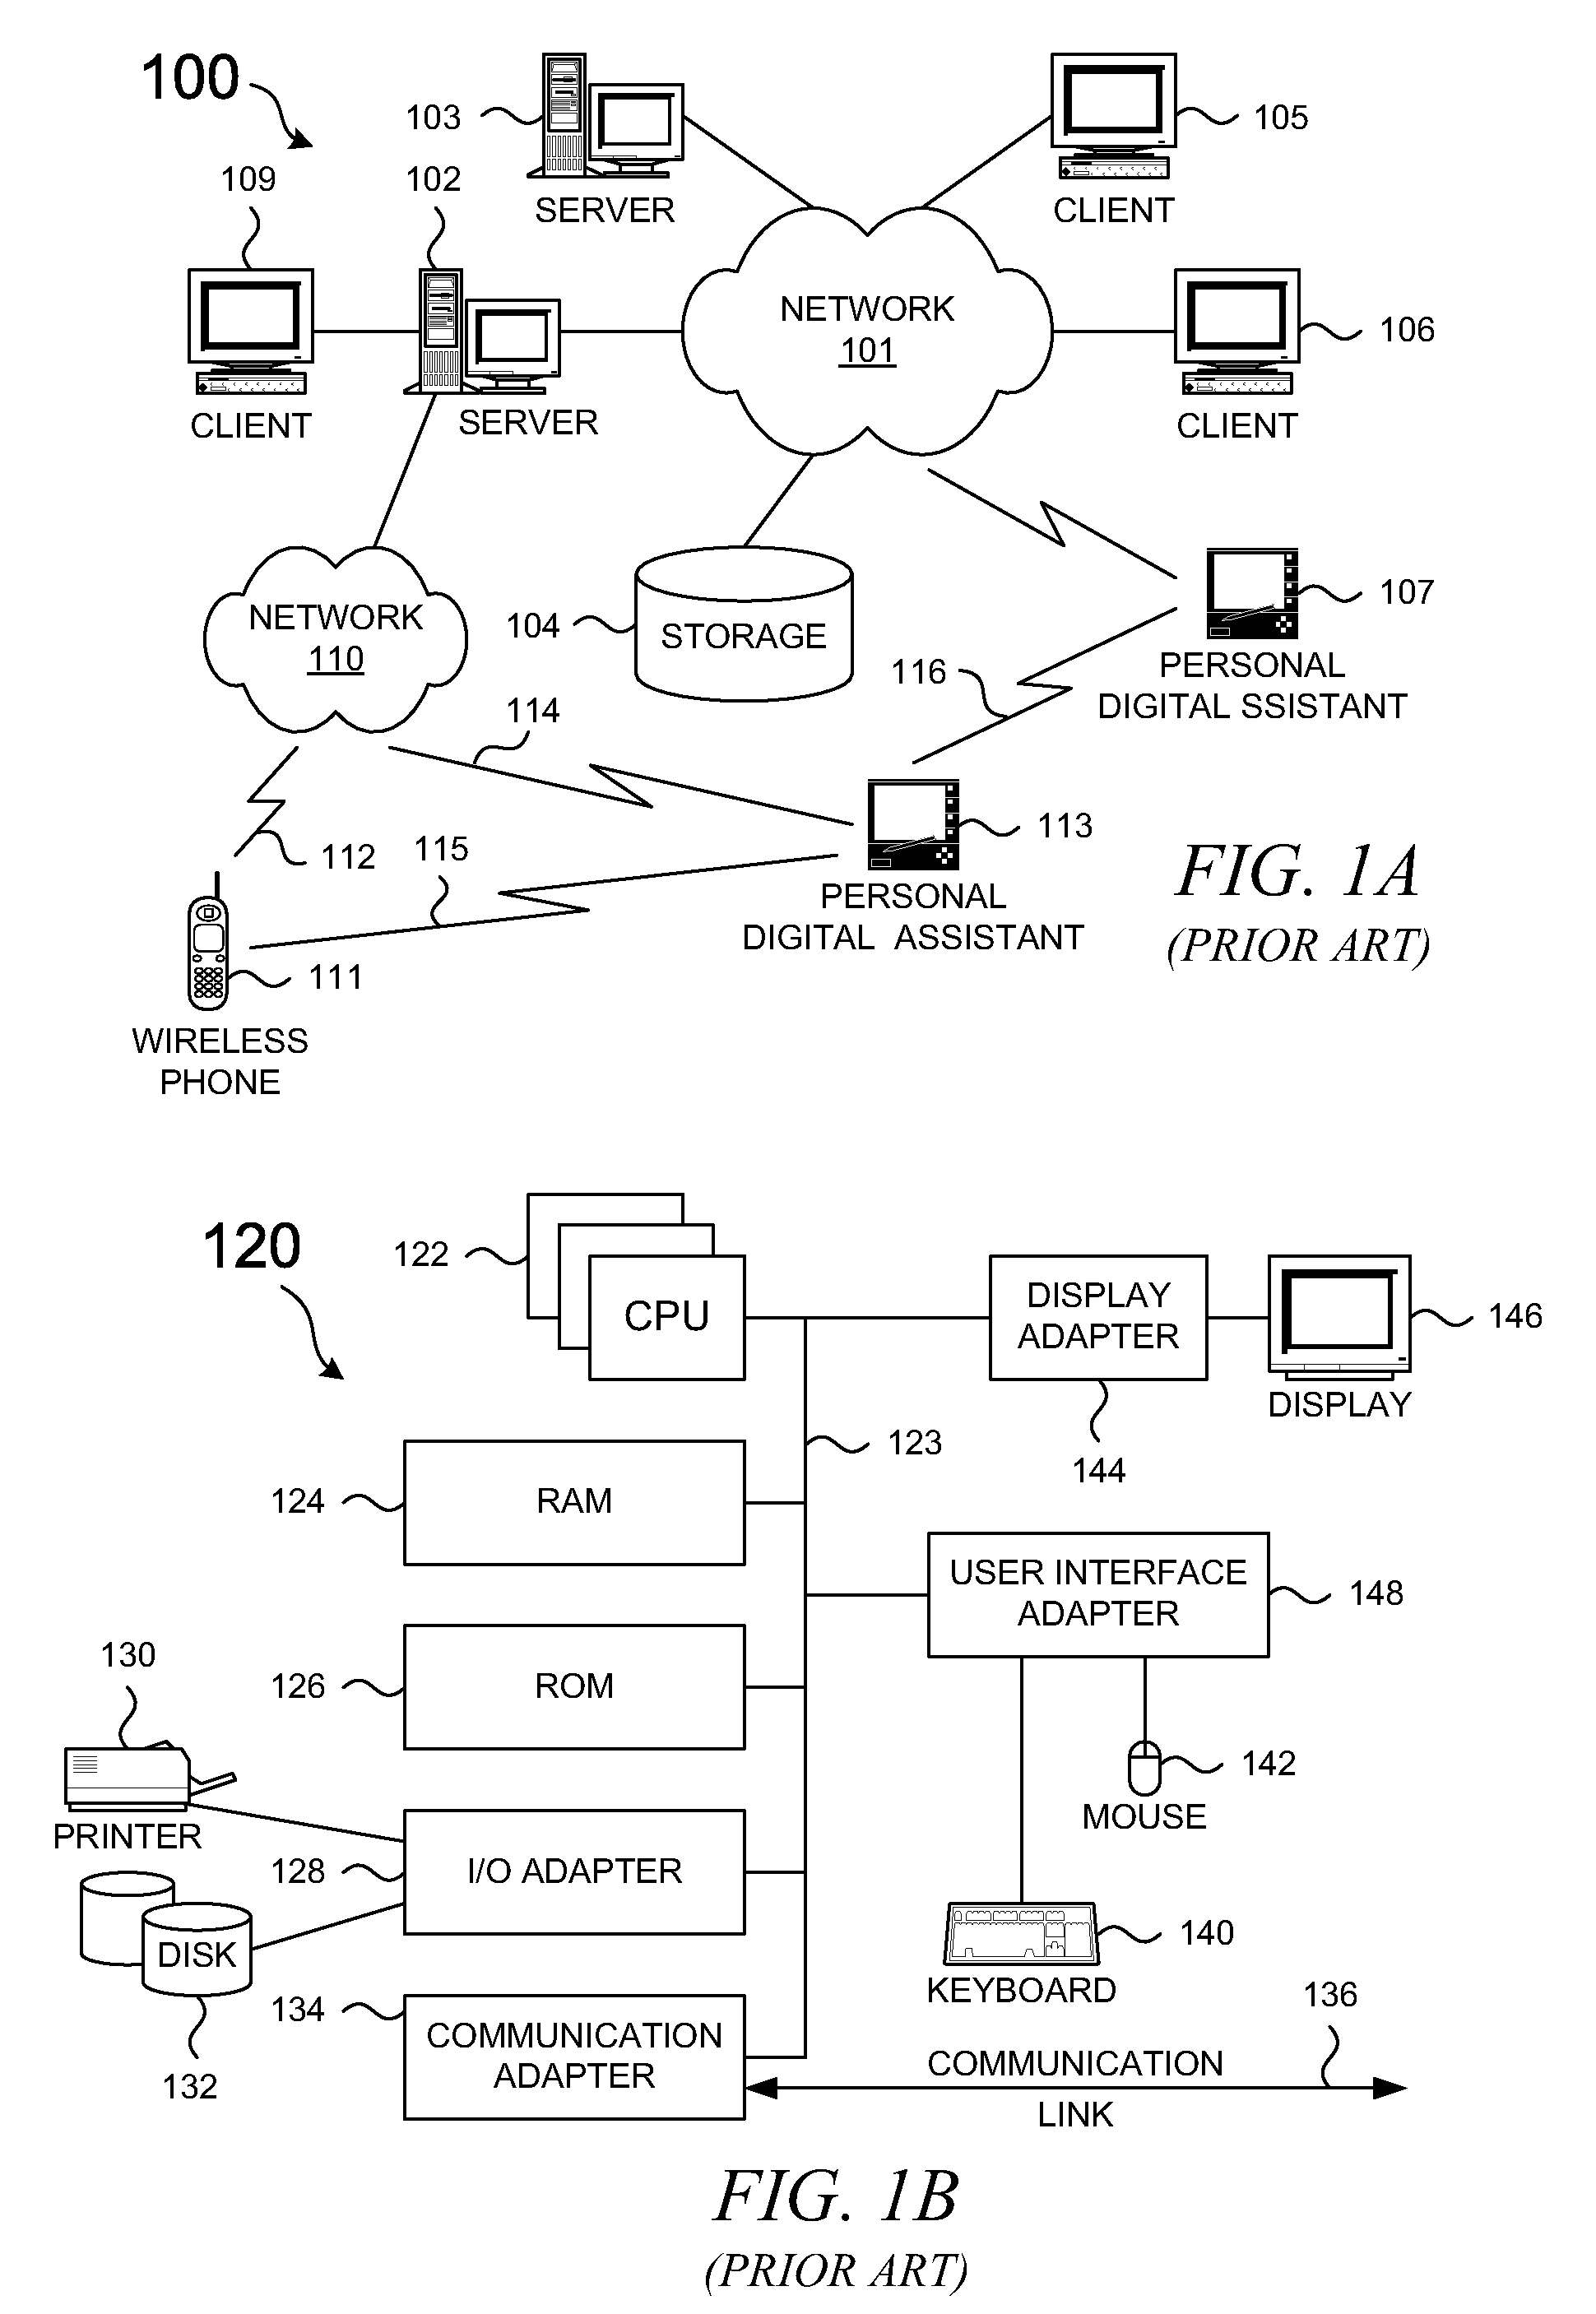 Method and system for distributed retrieval of data objects using tagged artifacts within federated protocol operations